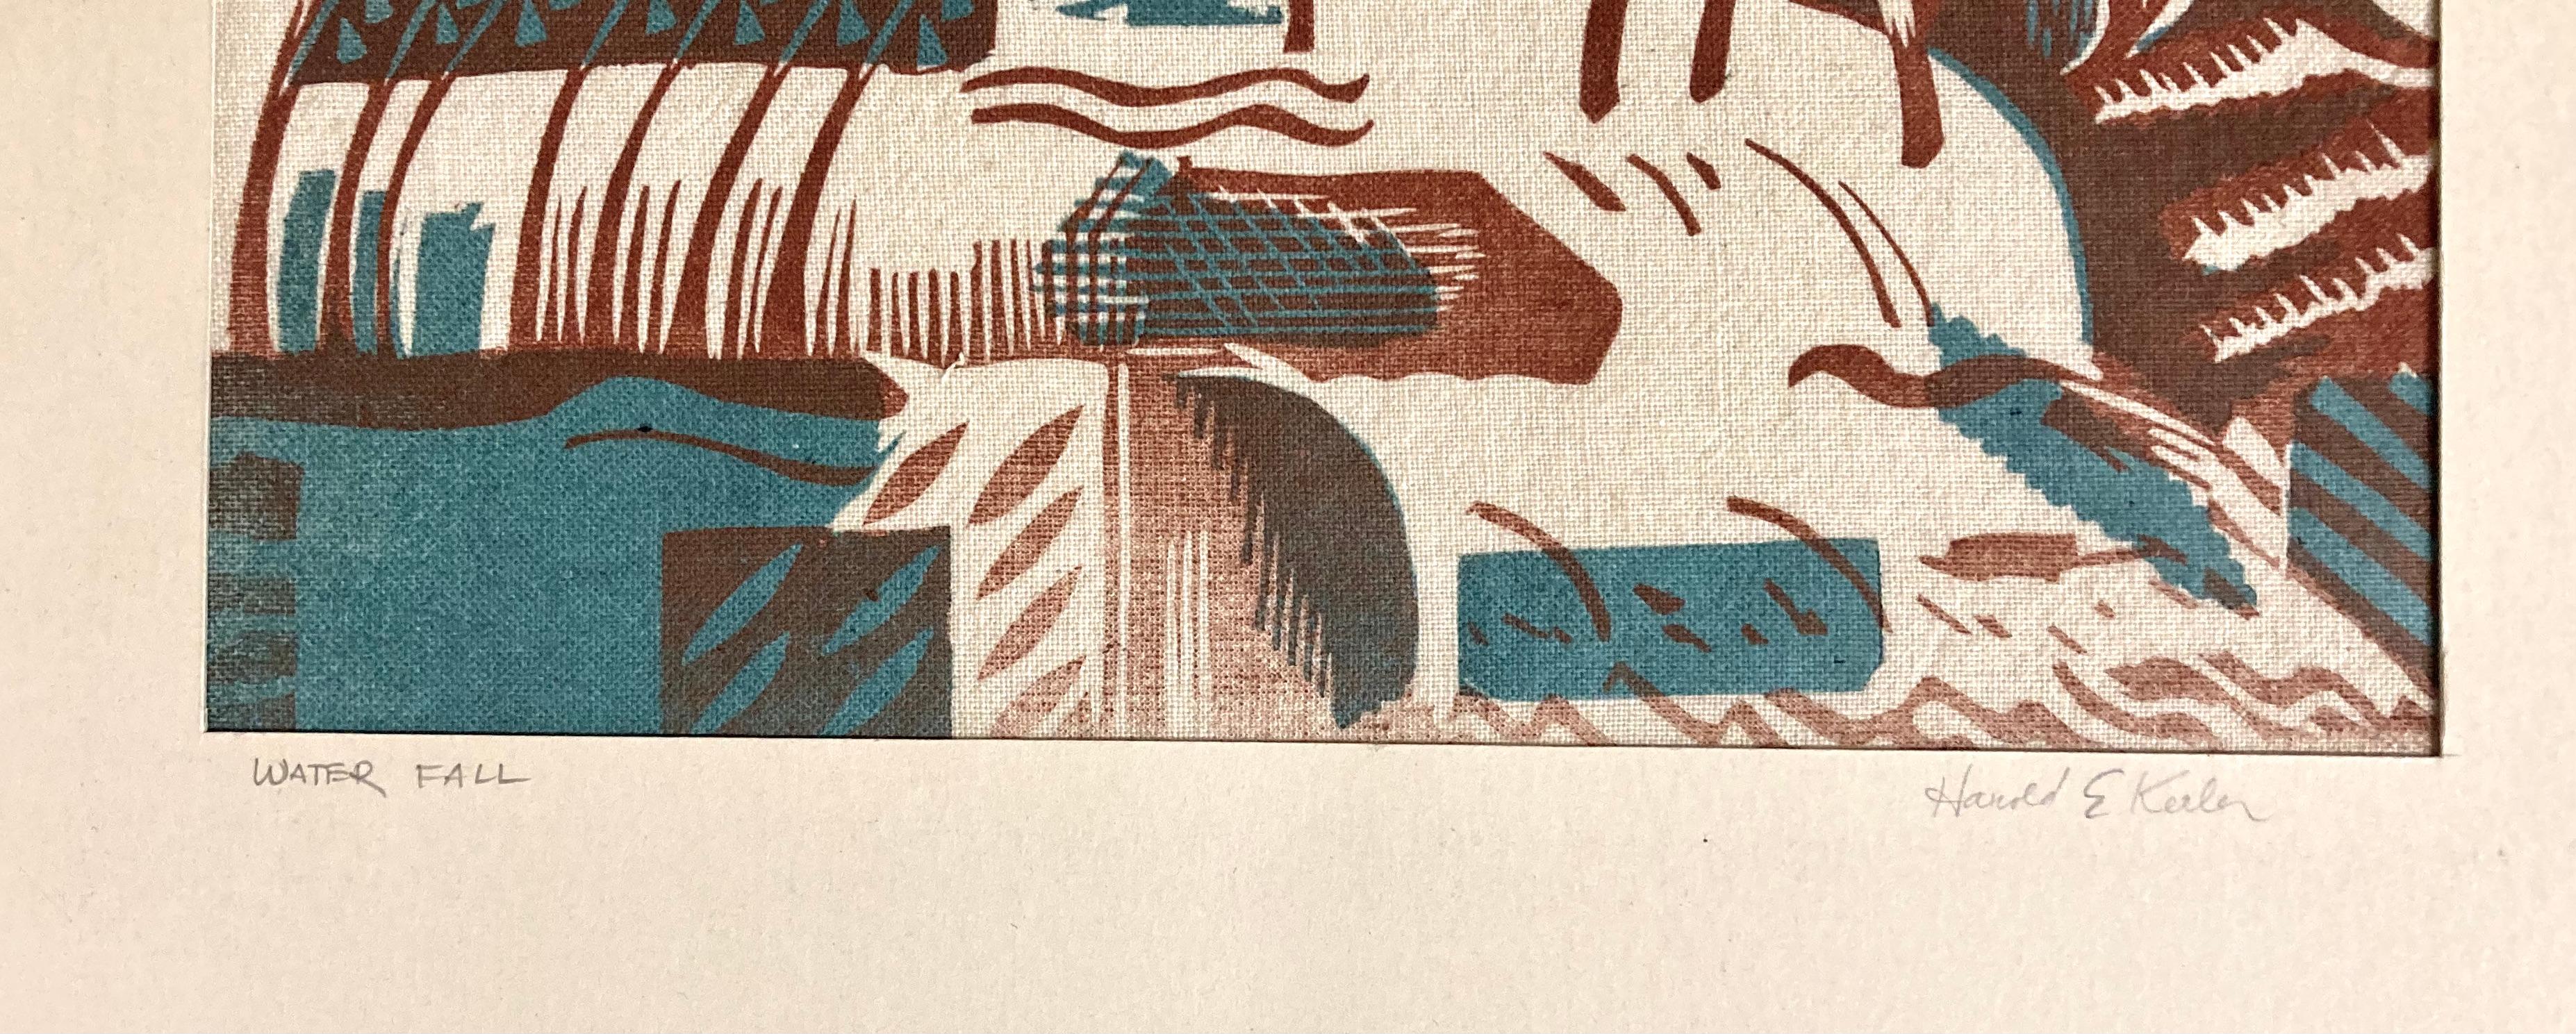 Harold E. Keeler worked in Hollywood as a set designer. That seems especially important here because the Water Fall looks a little as though it could be a woodland stage set -- to me at least. But also it's a linocut on cloth printed in brown and